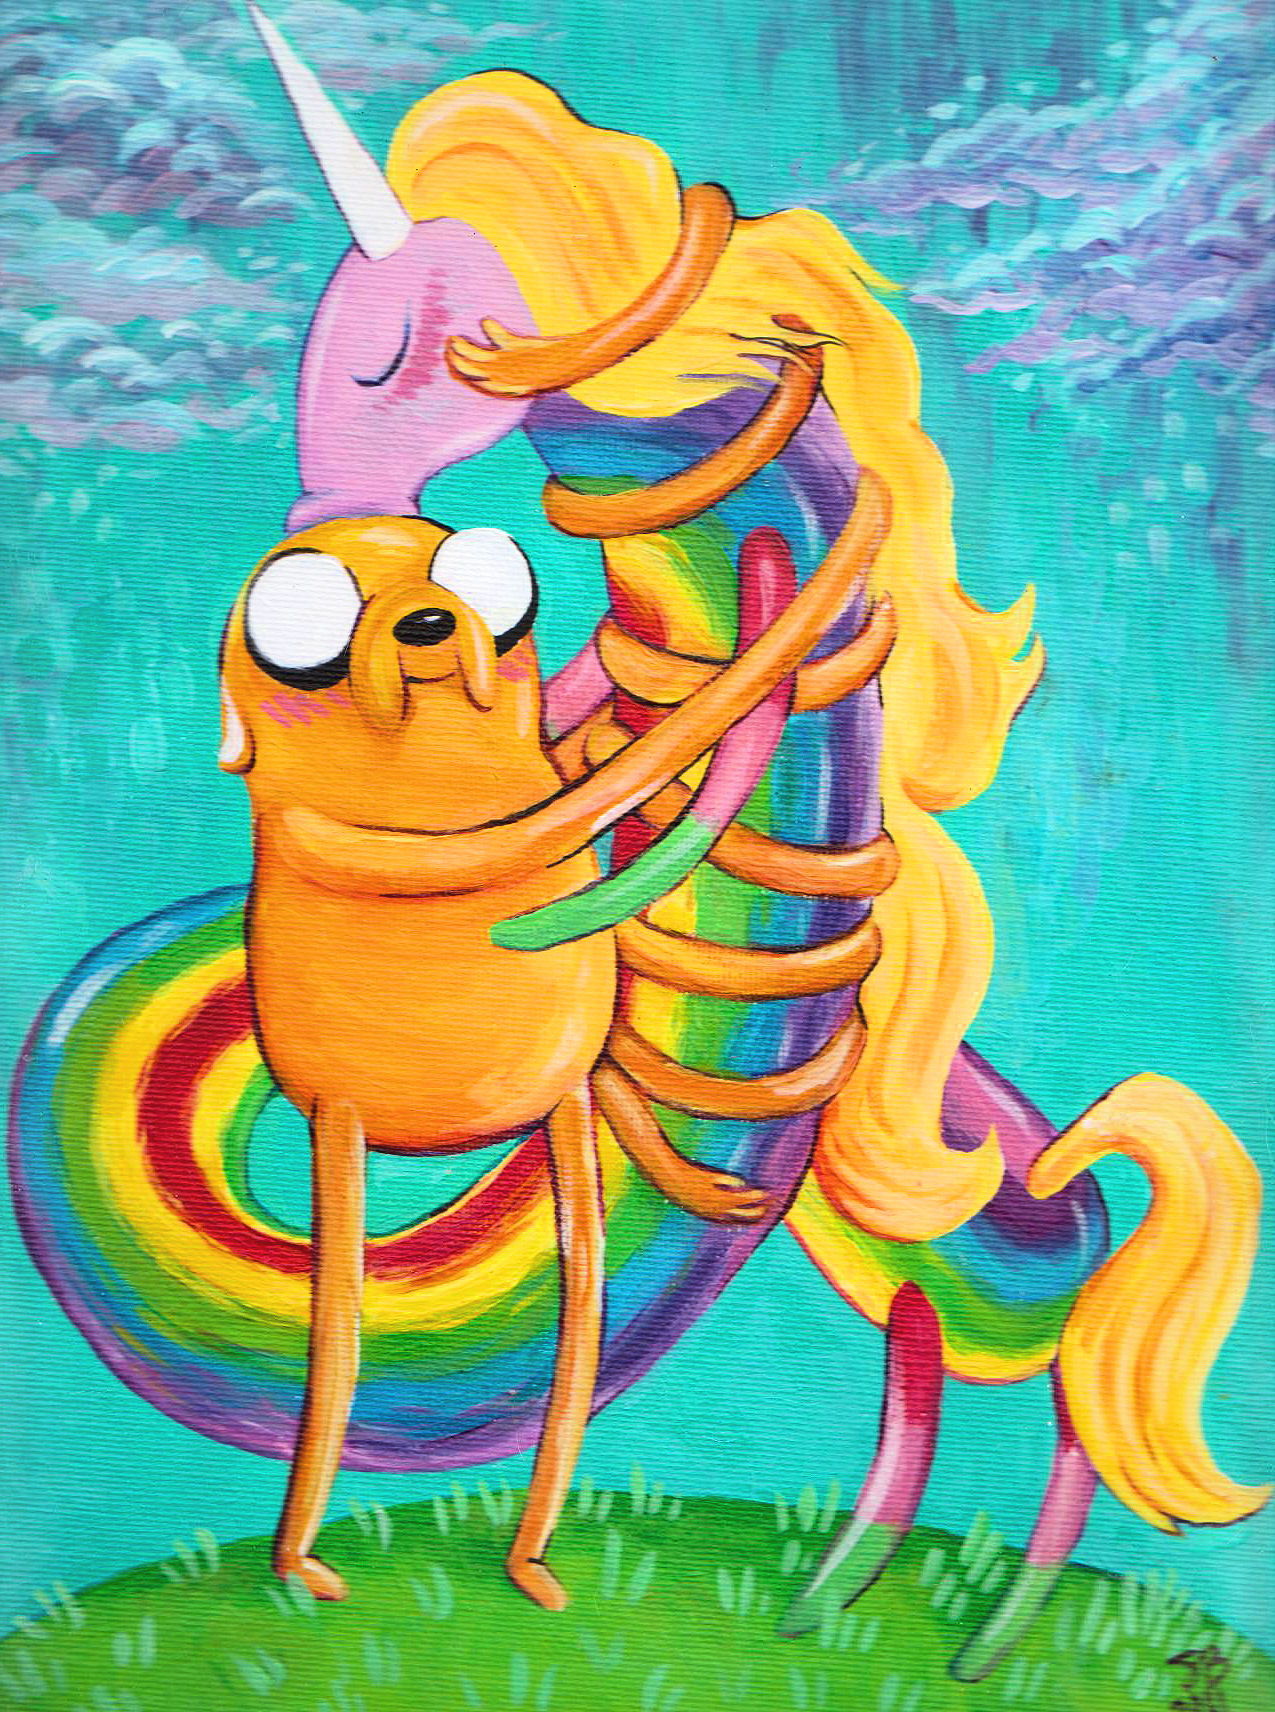 Jake the Dog Painting Adventure Time